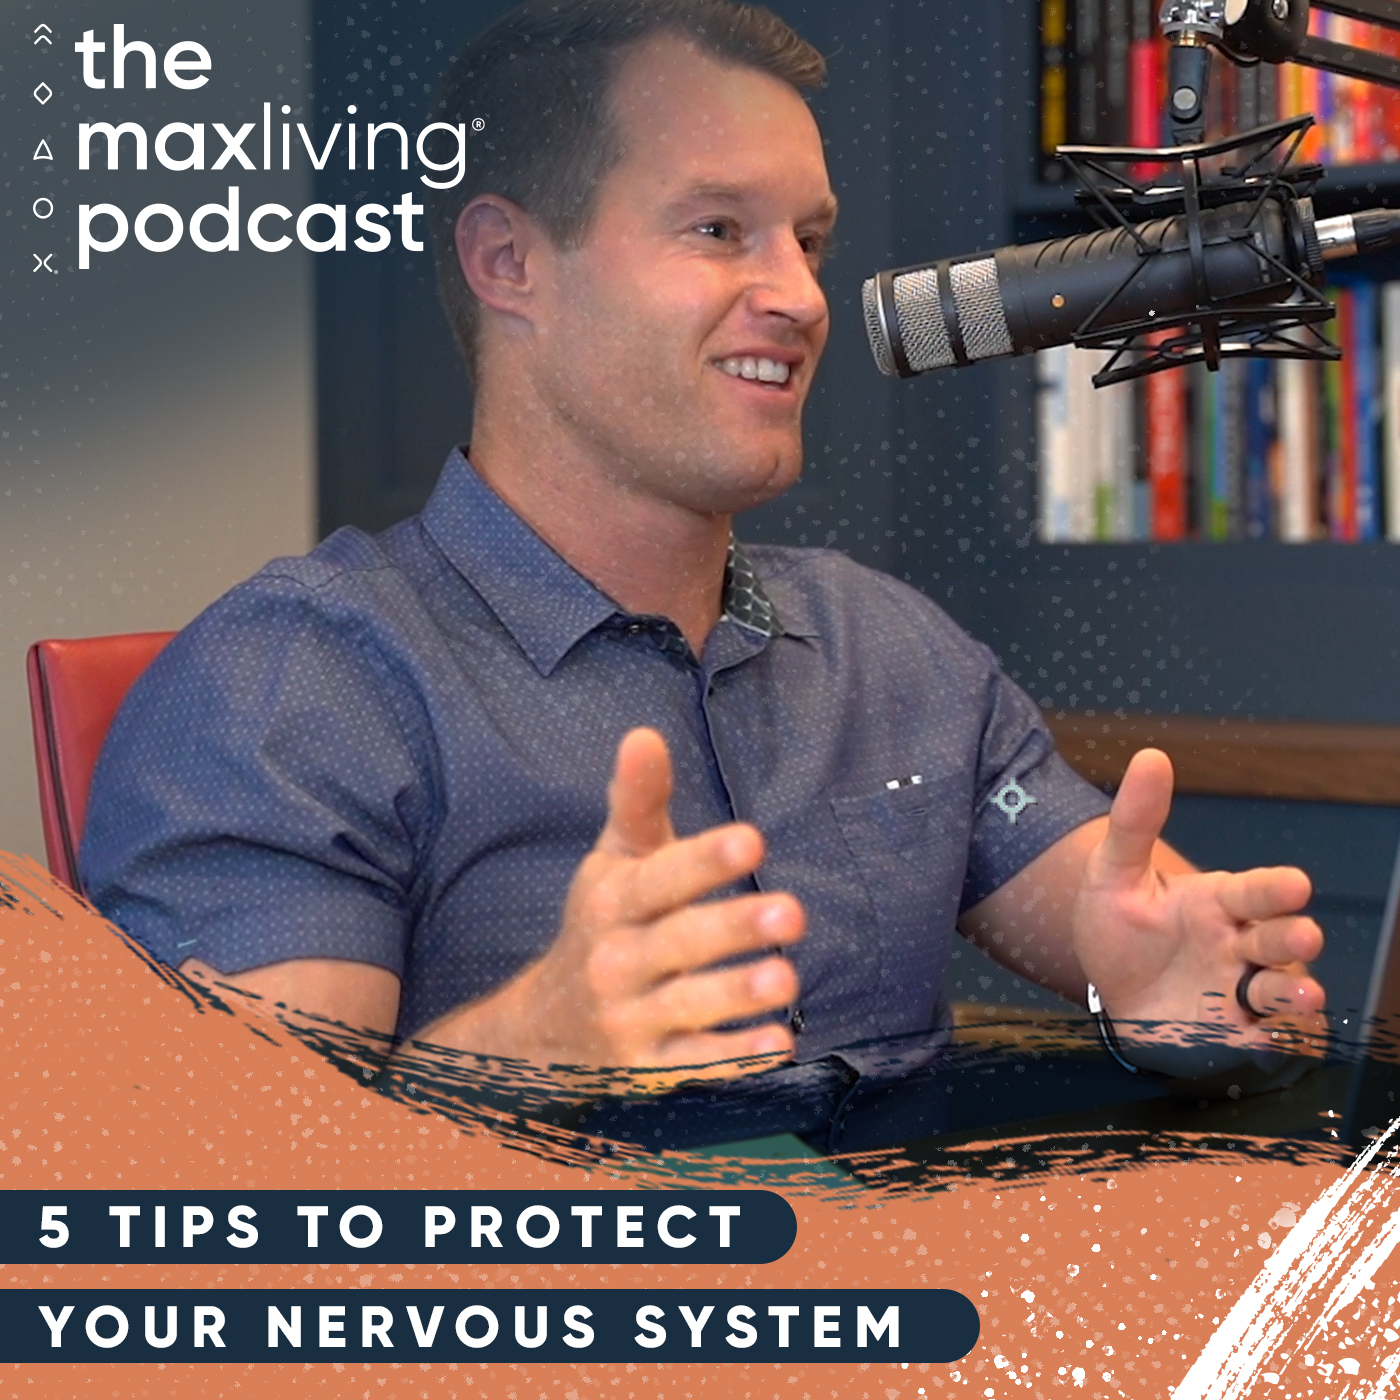 Episode 37 - 5 Tips to Protect Your Nervous System